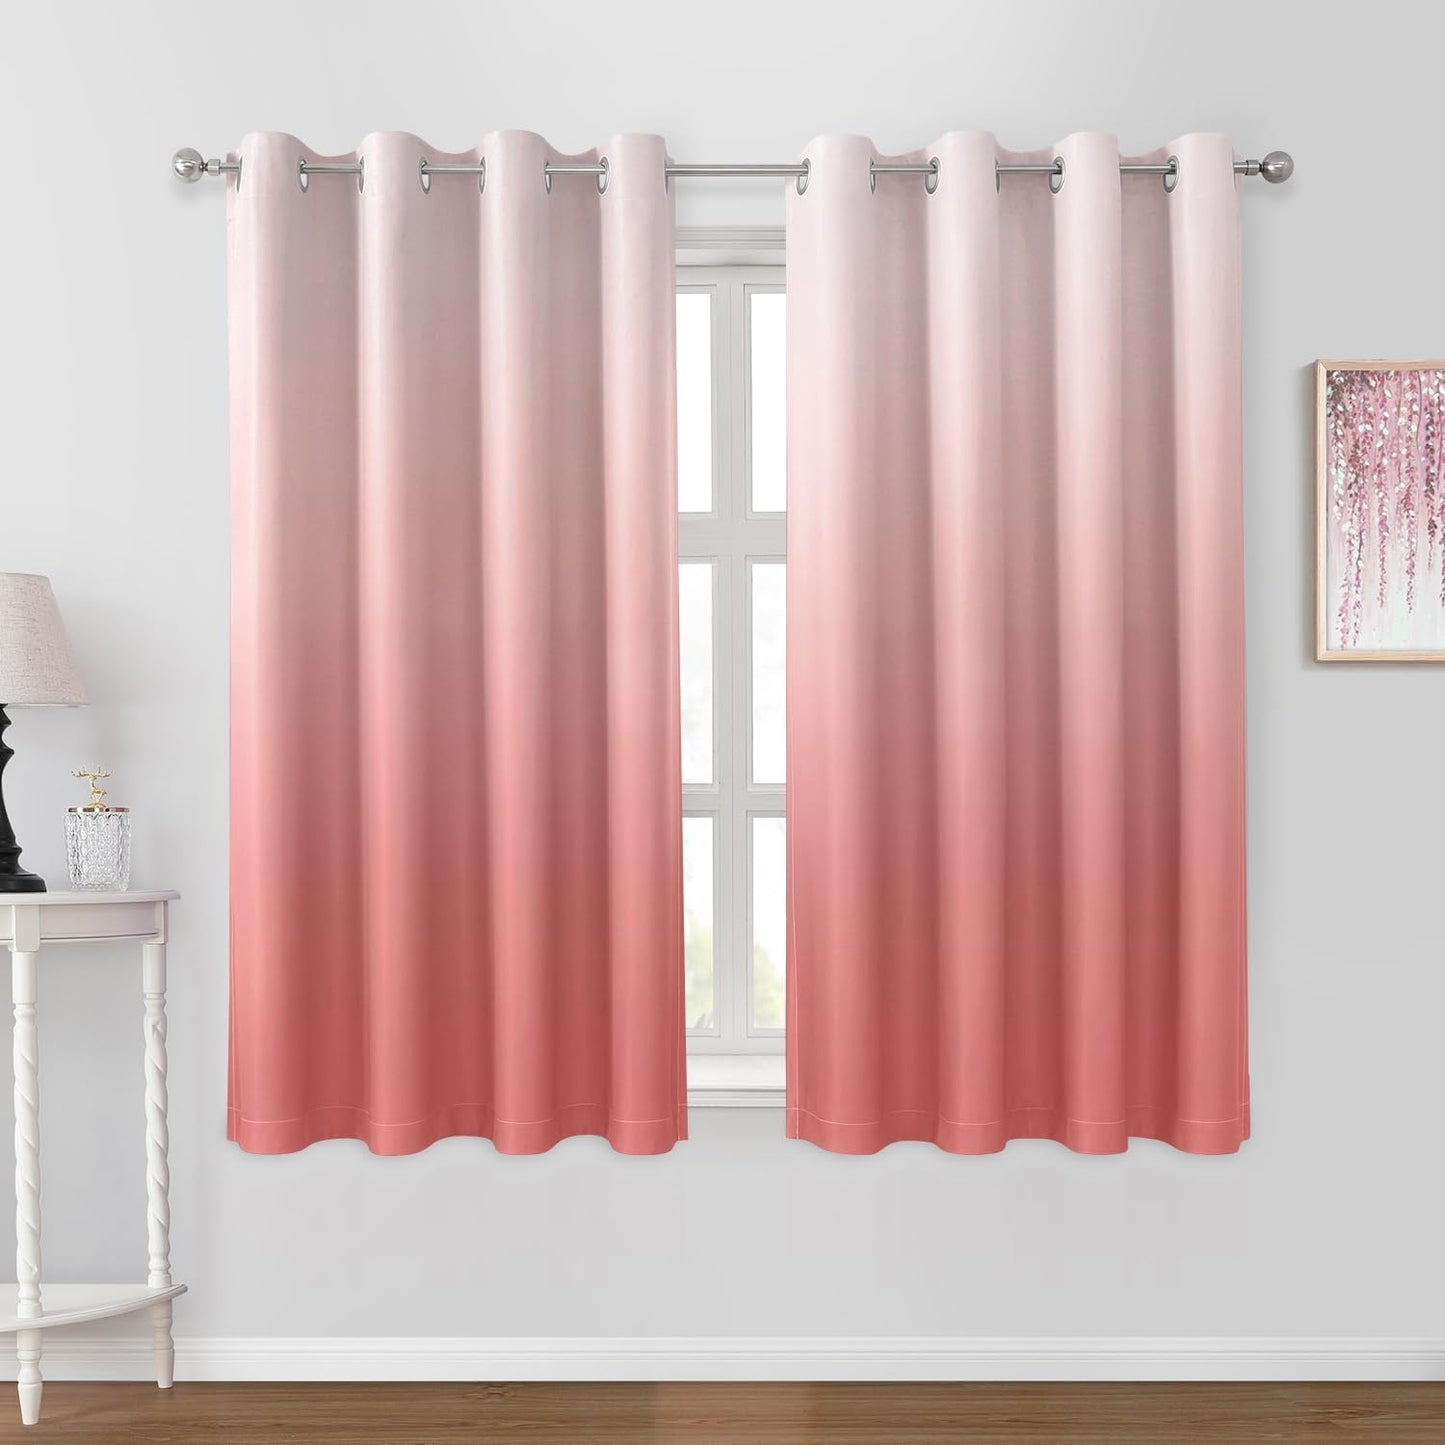 HOMEIDEAS Navy Blue Ombre Blackout Curtains 52 X 84 Inch Length Gradient Room Darkening Thermal Insulated Energy Saving Grommet 2 Panels Window Drapes for Living Room/Bedroom  HOMEIDEAS Coral Pink 52"W X 63"L 